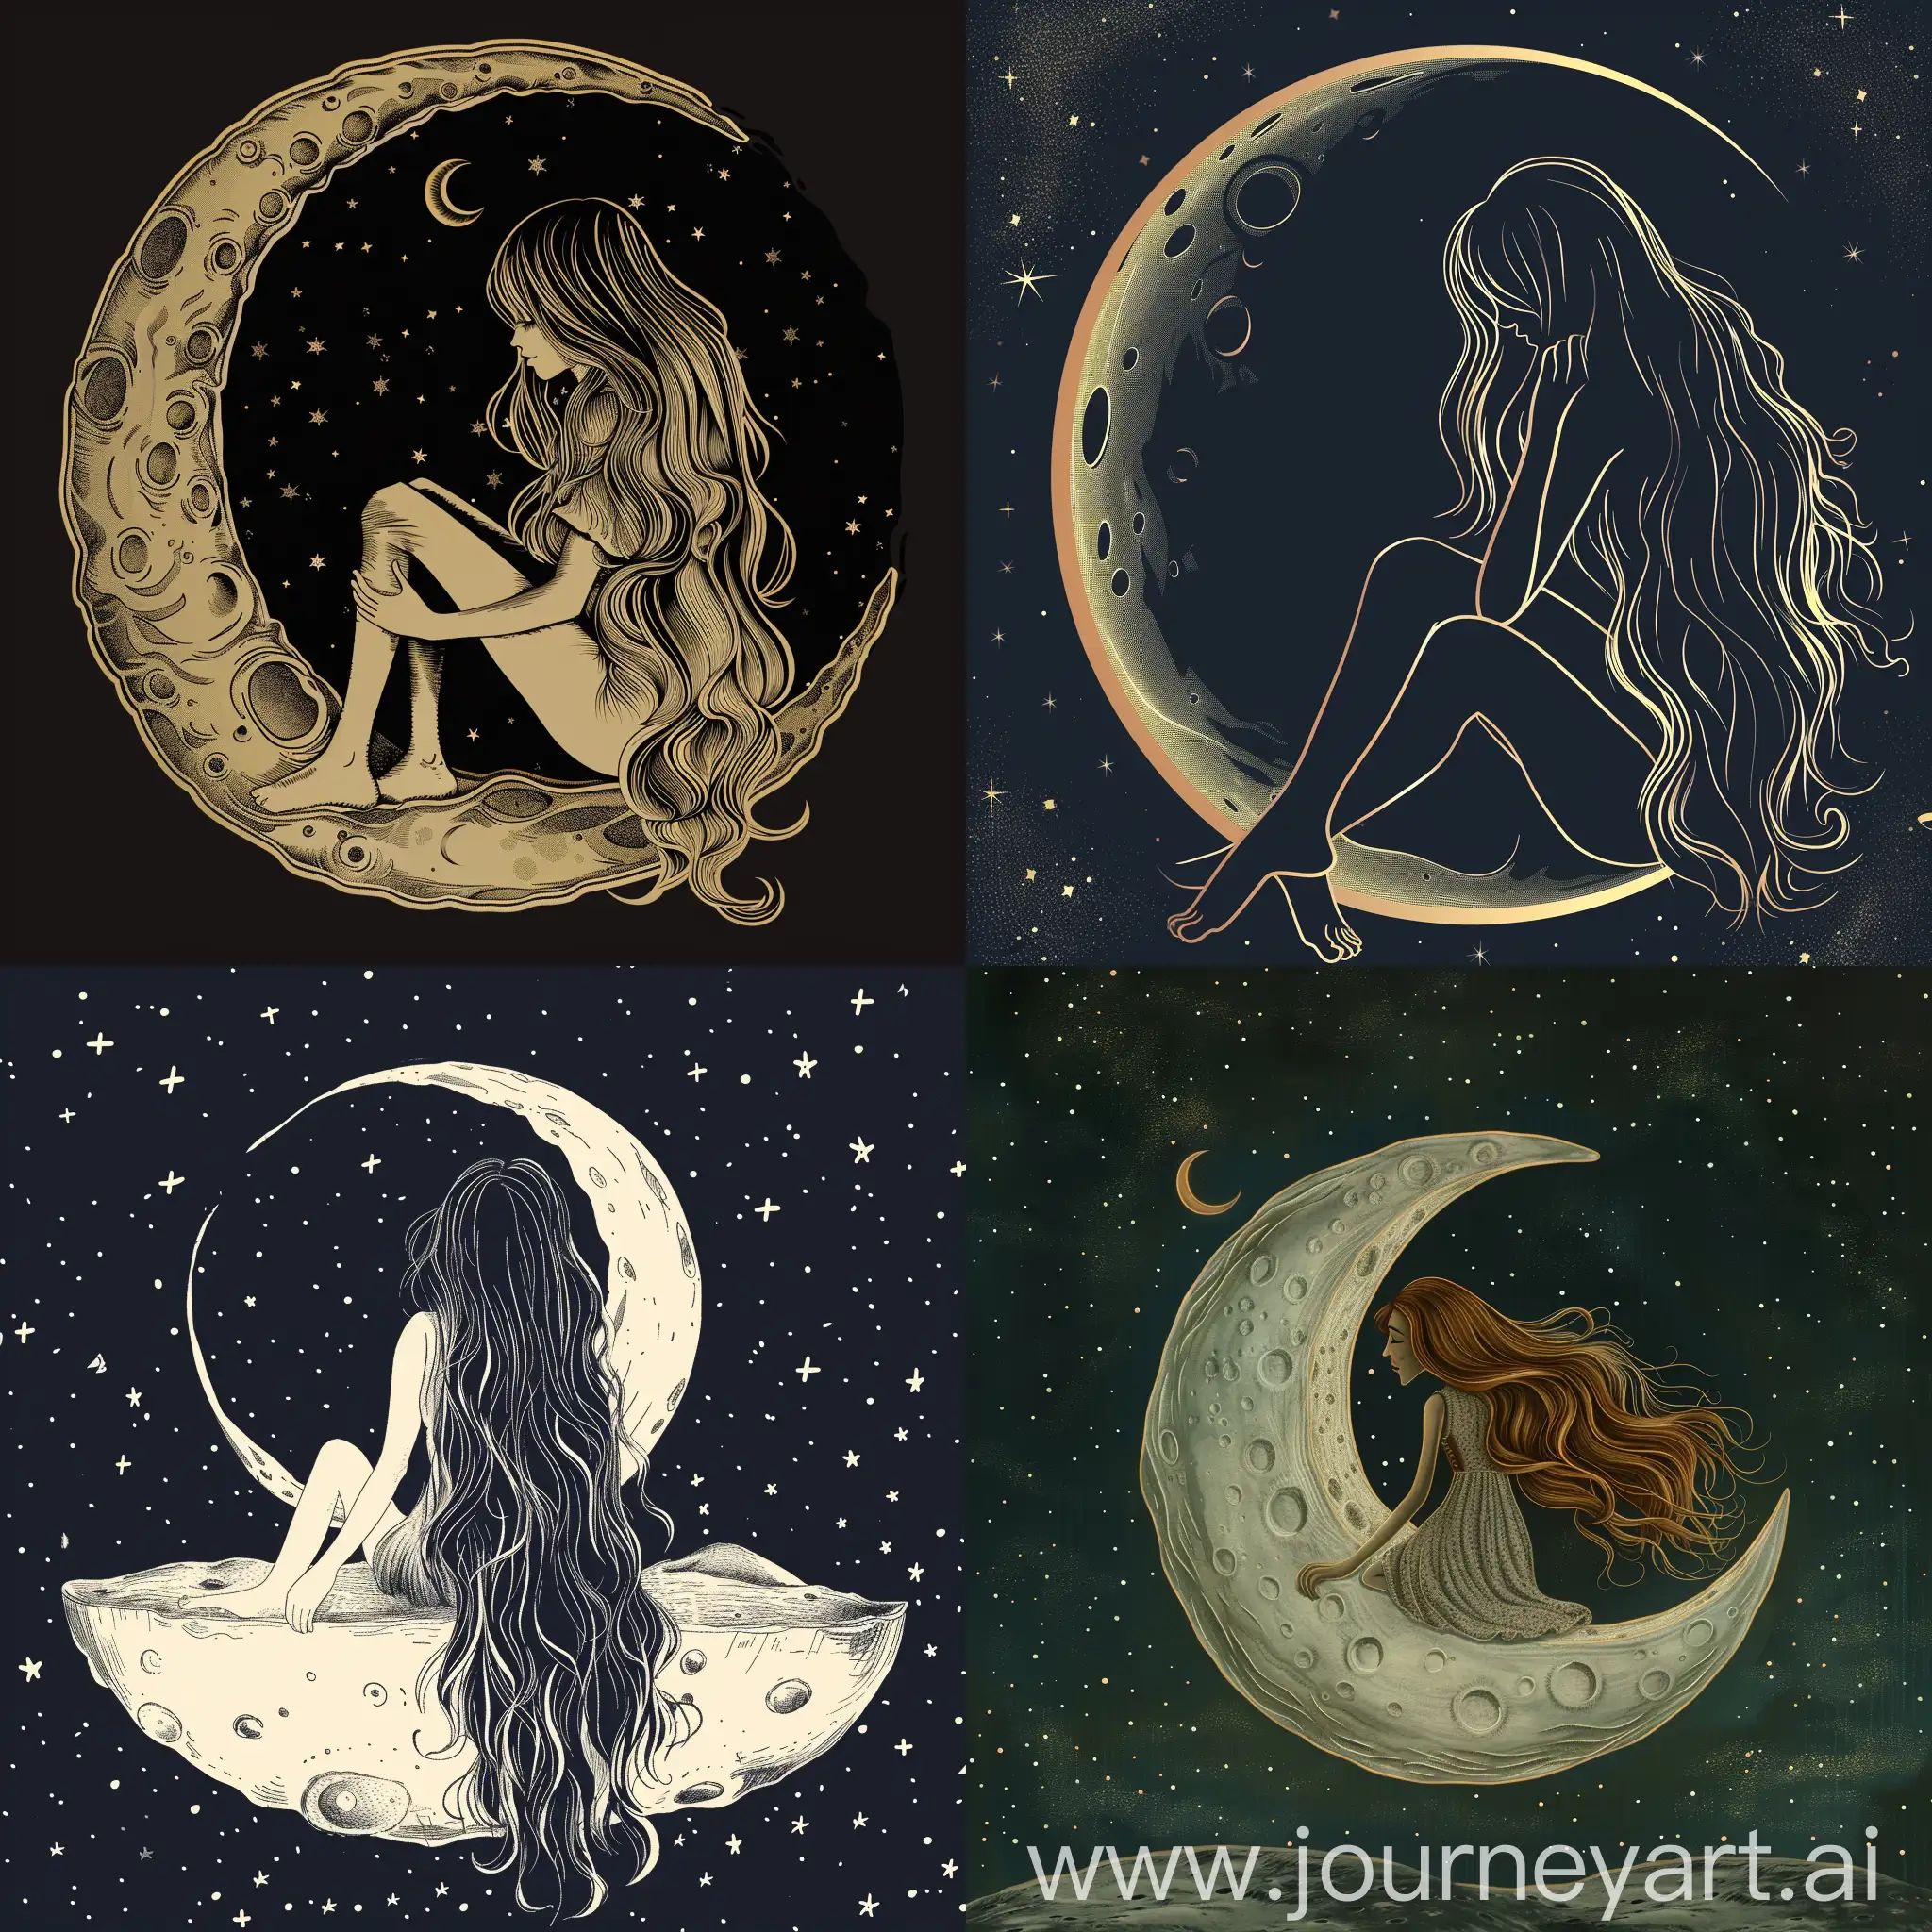 Girl with long wavy hair sitting on the moon